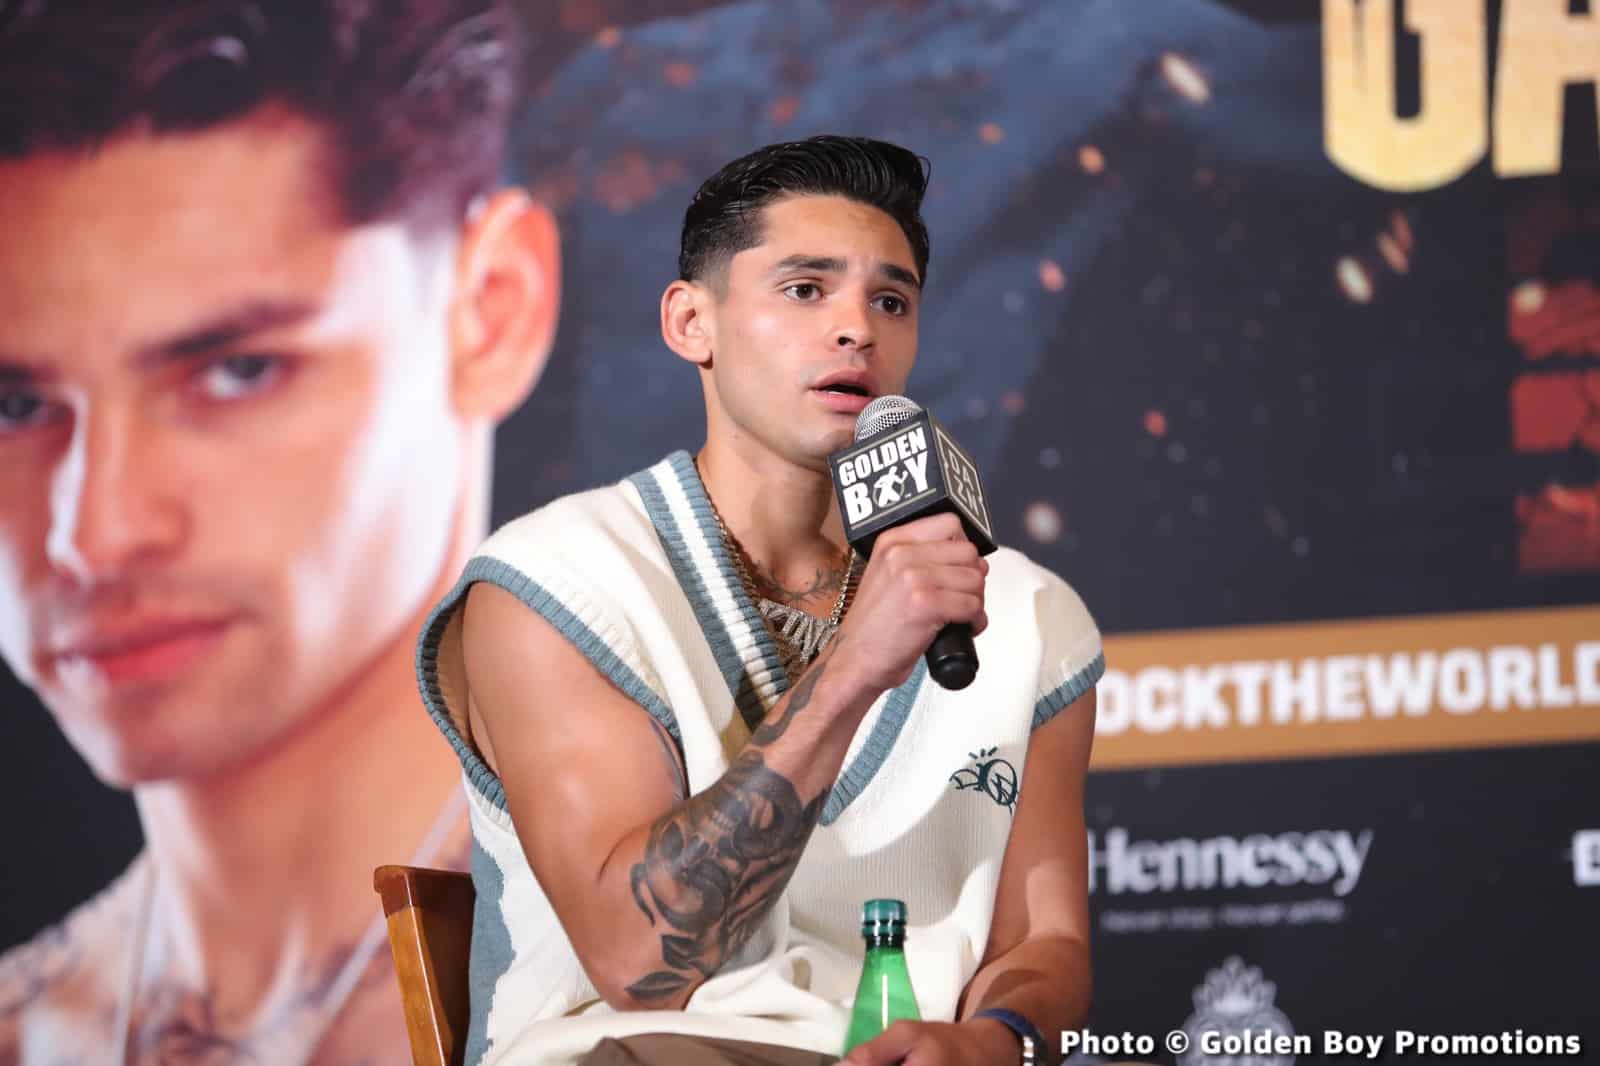 Image: Ryan Garcia sends Adrien Broner message of support for his mental health issues